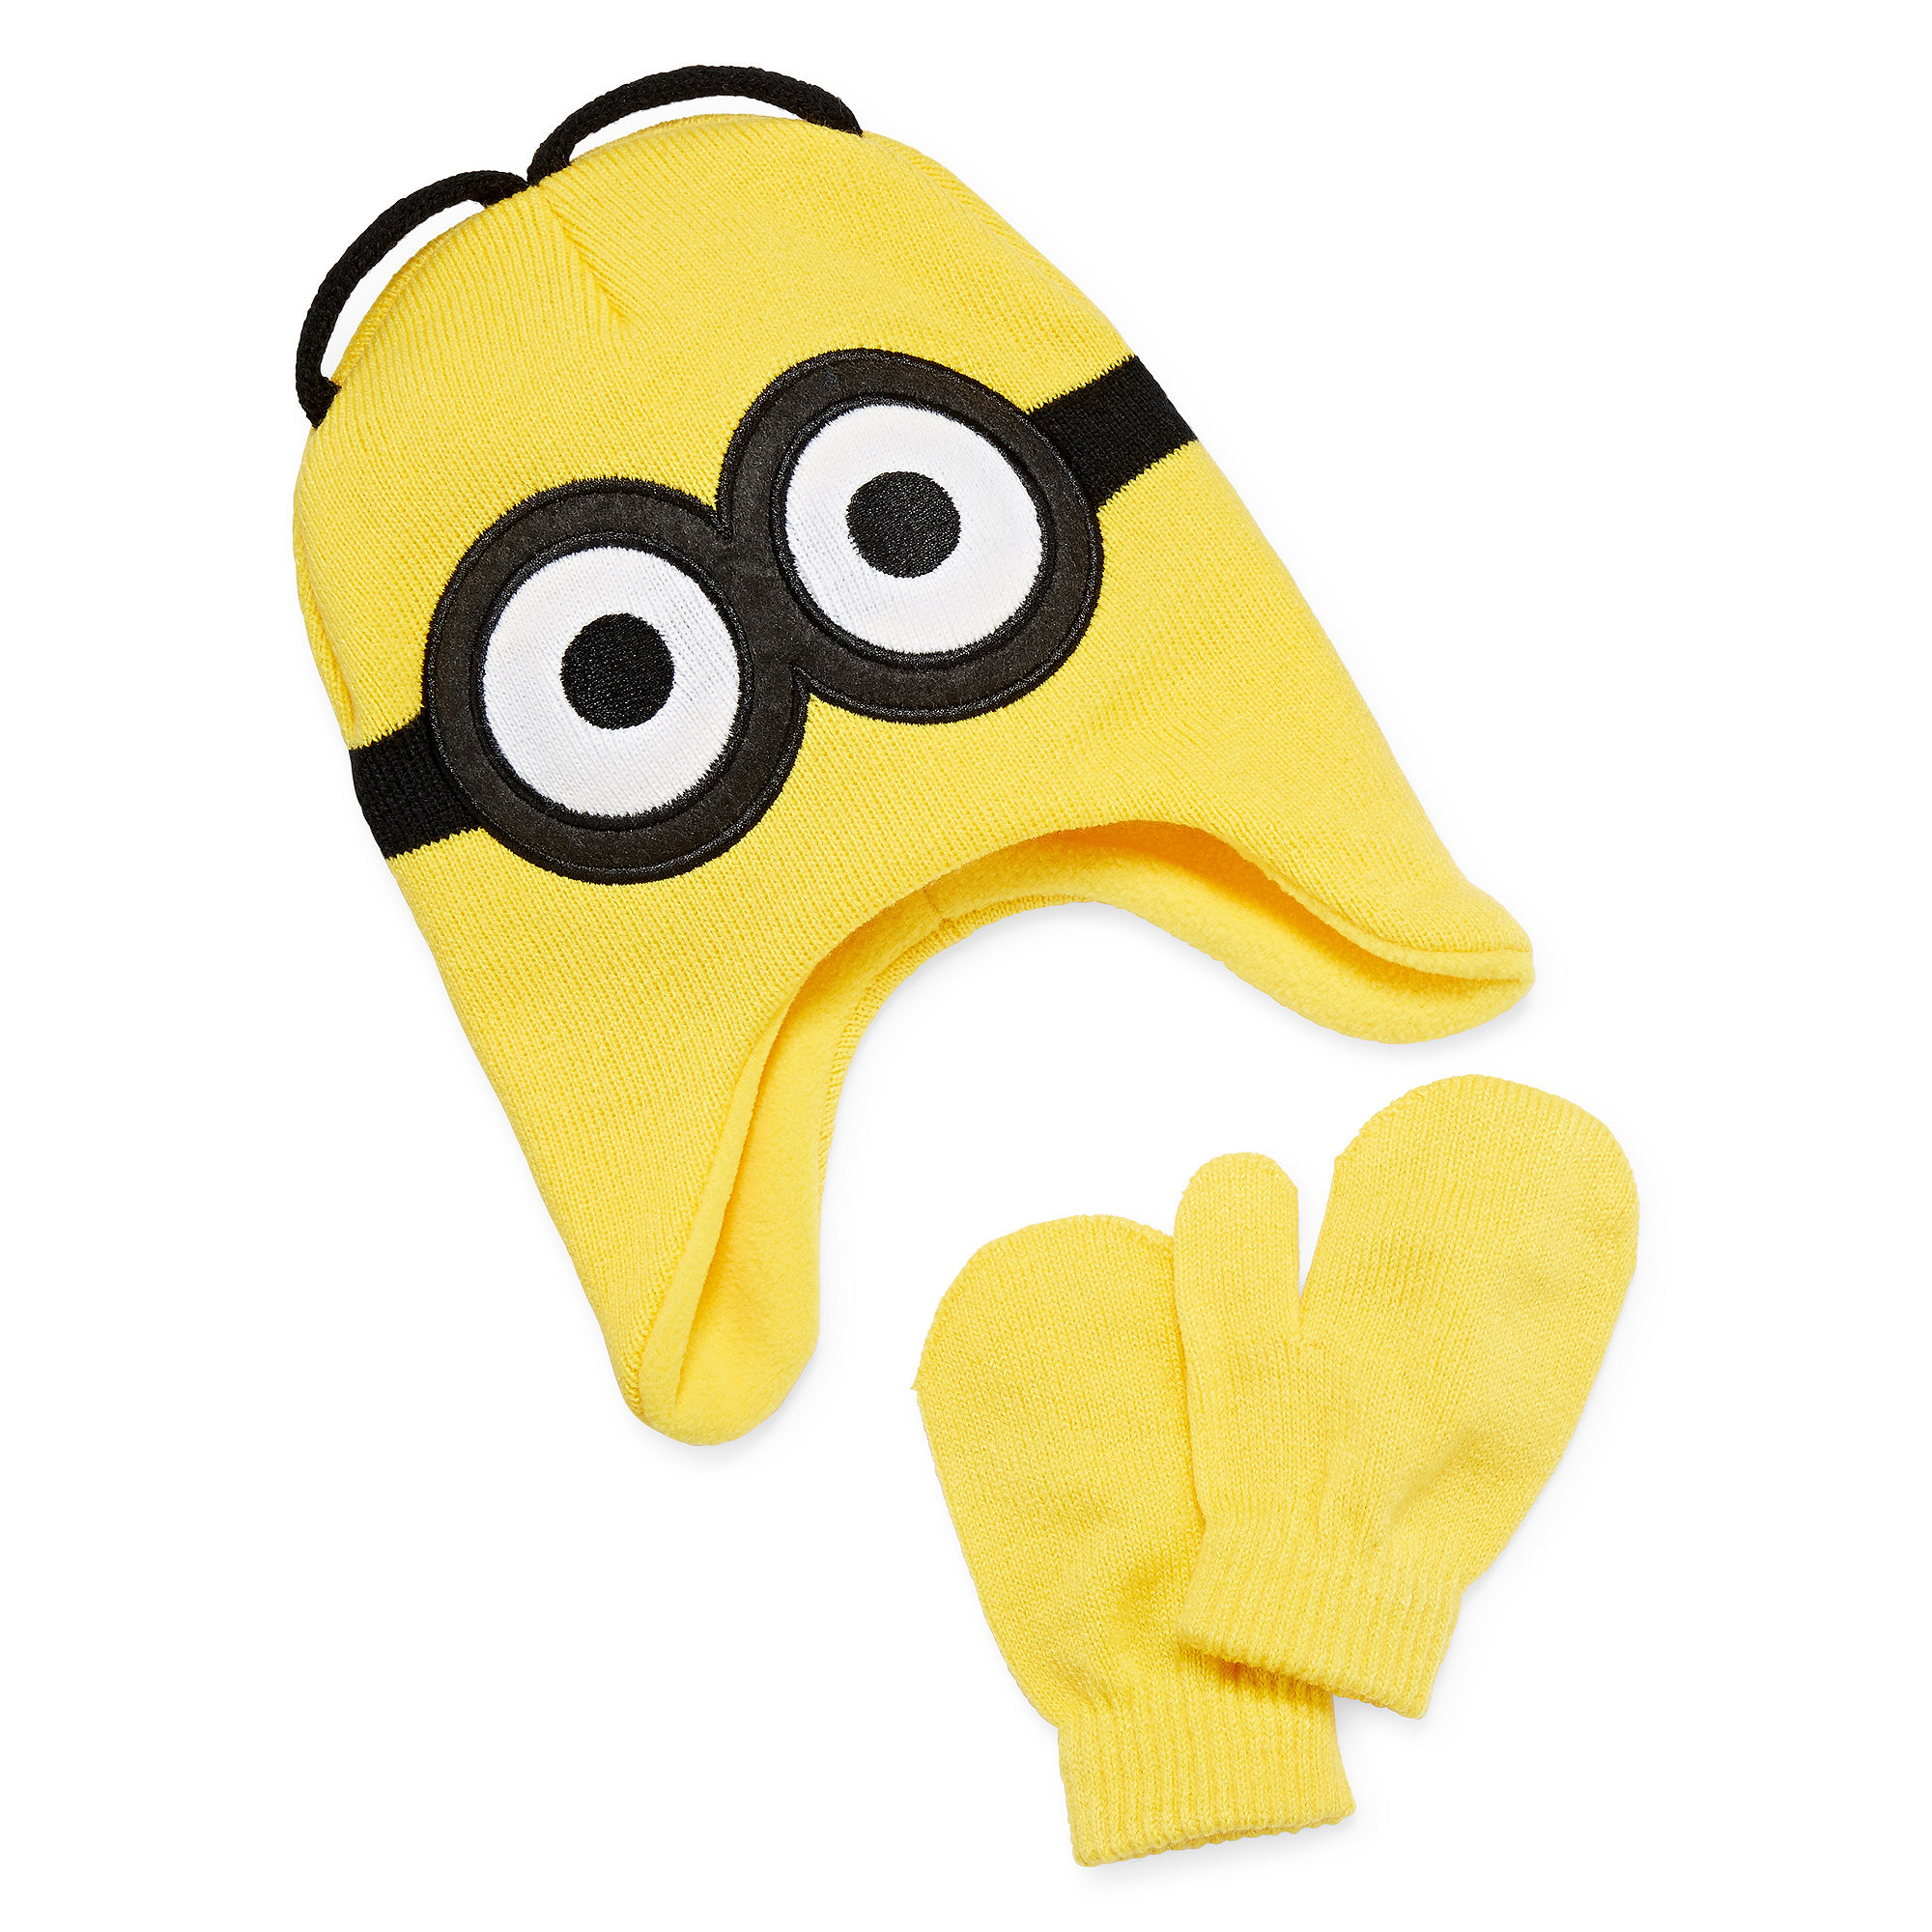 UPC 843340118161 product image for Despicable Me Hat and Mittens Set - Boys | upcitemdb.com